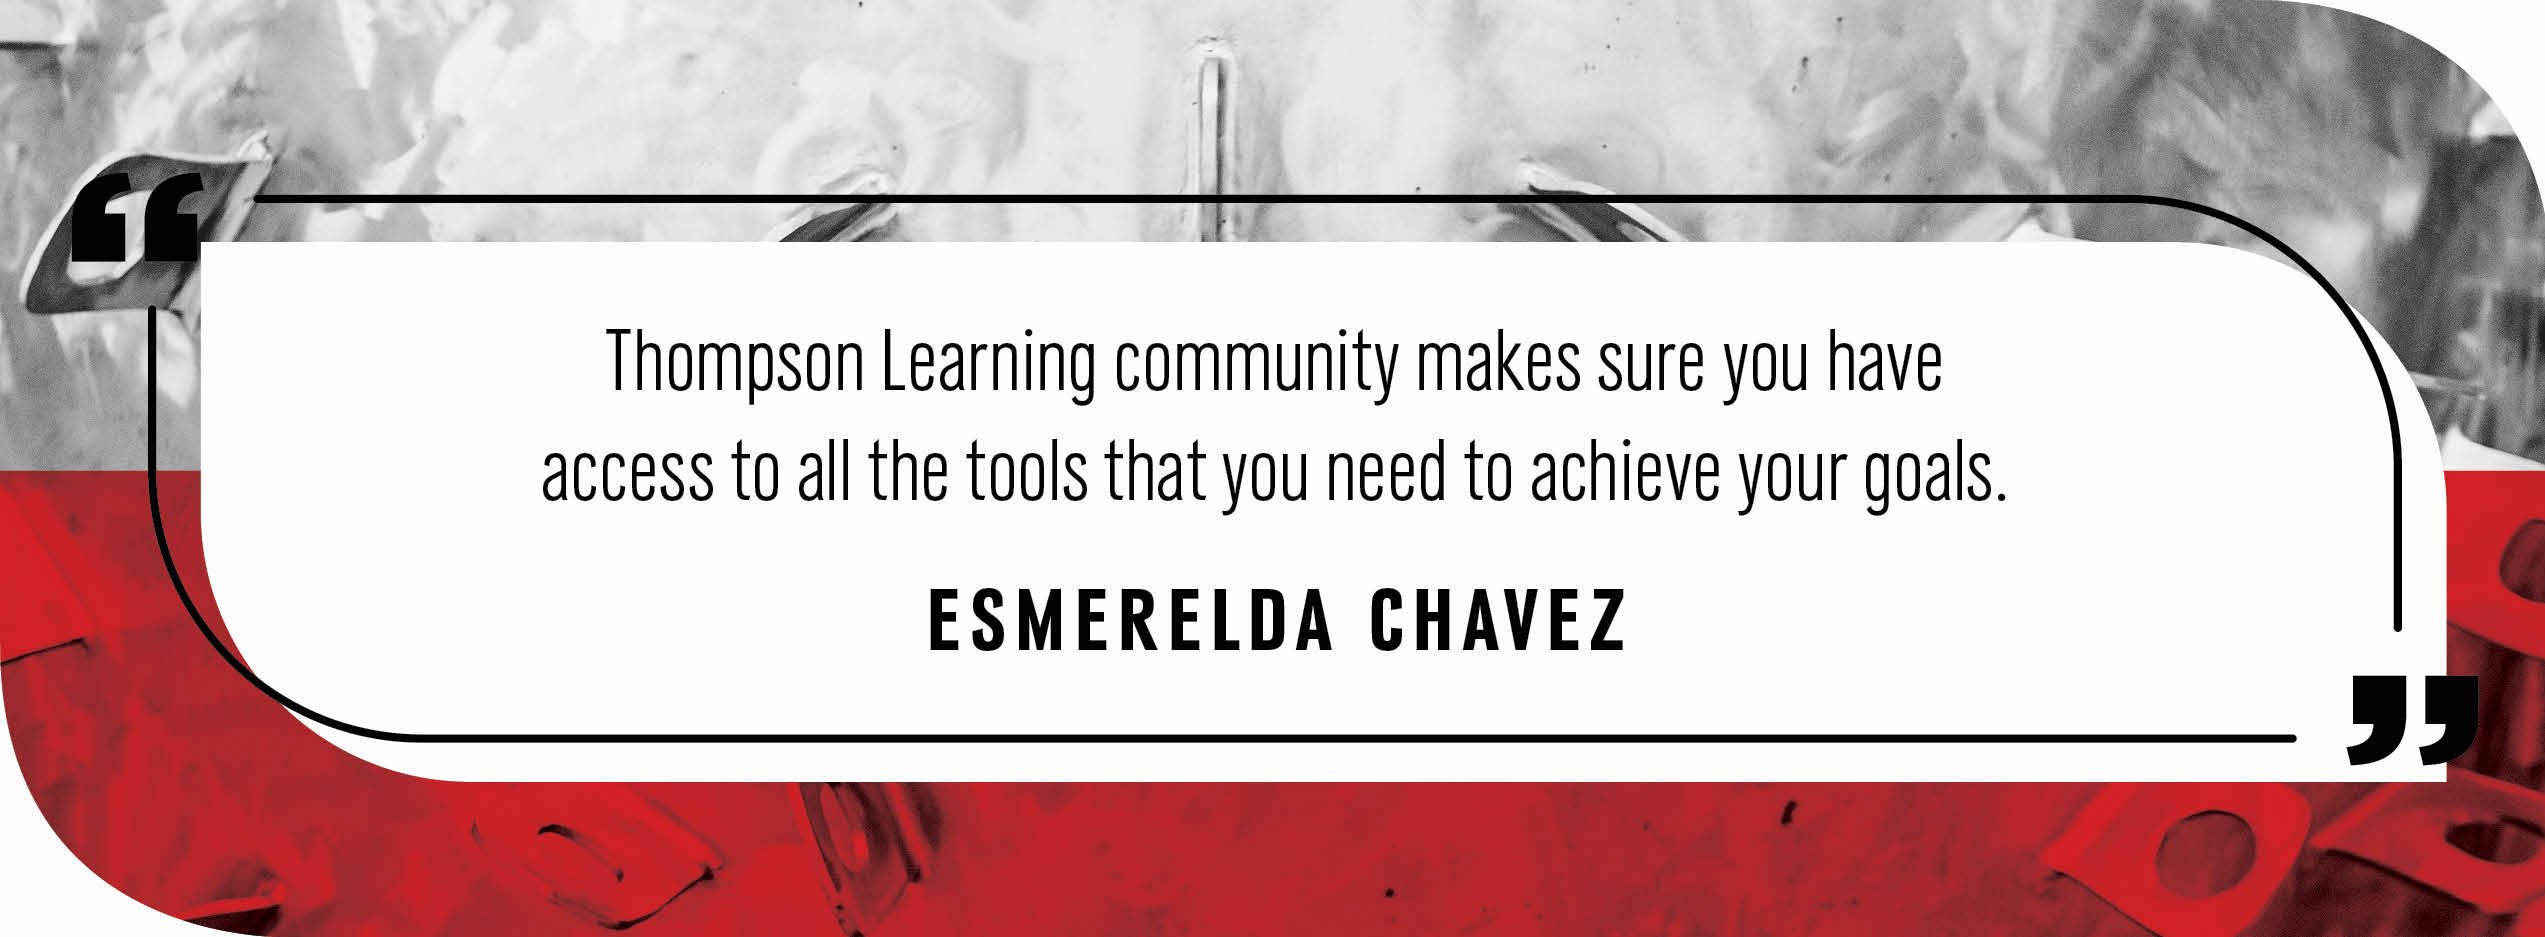 Quote by Esmerelda Chavez: "Thompson Learning commnuity makes sure you have access to all the tools that you need to achieve your goals."